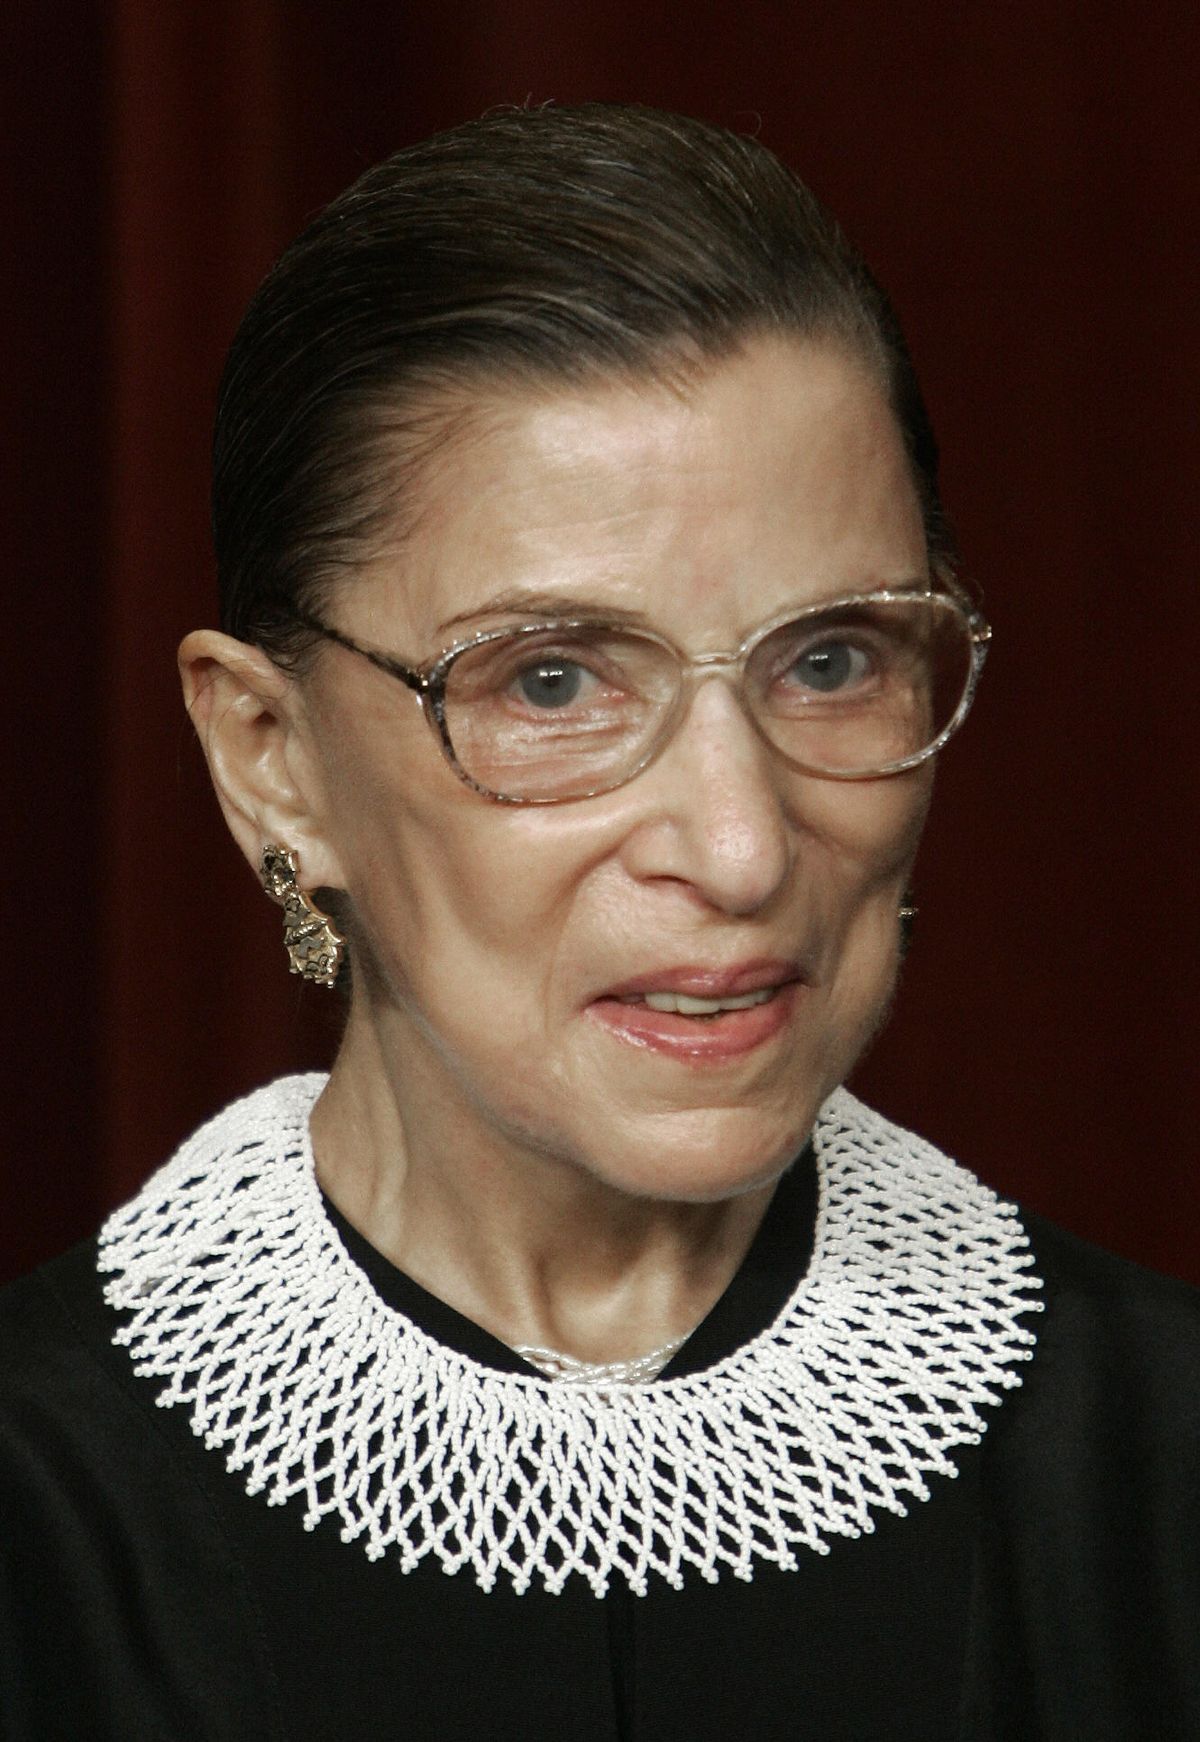 files us supreme court justice ruth bader ginsburg poses for a class photo 03 march 2006 inside the supreme court in washington, dc a statement released by the supreme court february 5, 2009 ginsburg has undergone surgery for pancreatic cancer, which was apparently at an early stage court officials said  ginsburg, 75, had surgery thursday at the memorial sloan kettering cancer center in new york she is expected to be in the hospital for seven 10 days, said her surgeon dr murray brennan     afp photopaul j richardsfiles photo credit should read paul j richardsafp via getty images